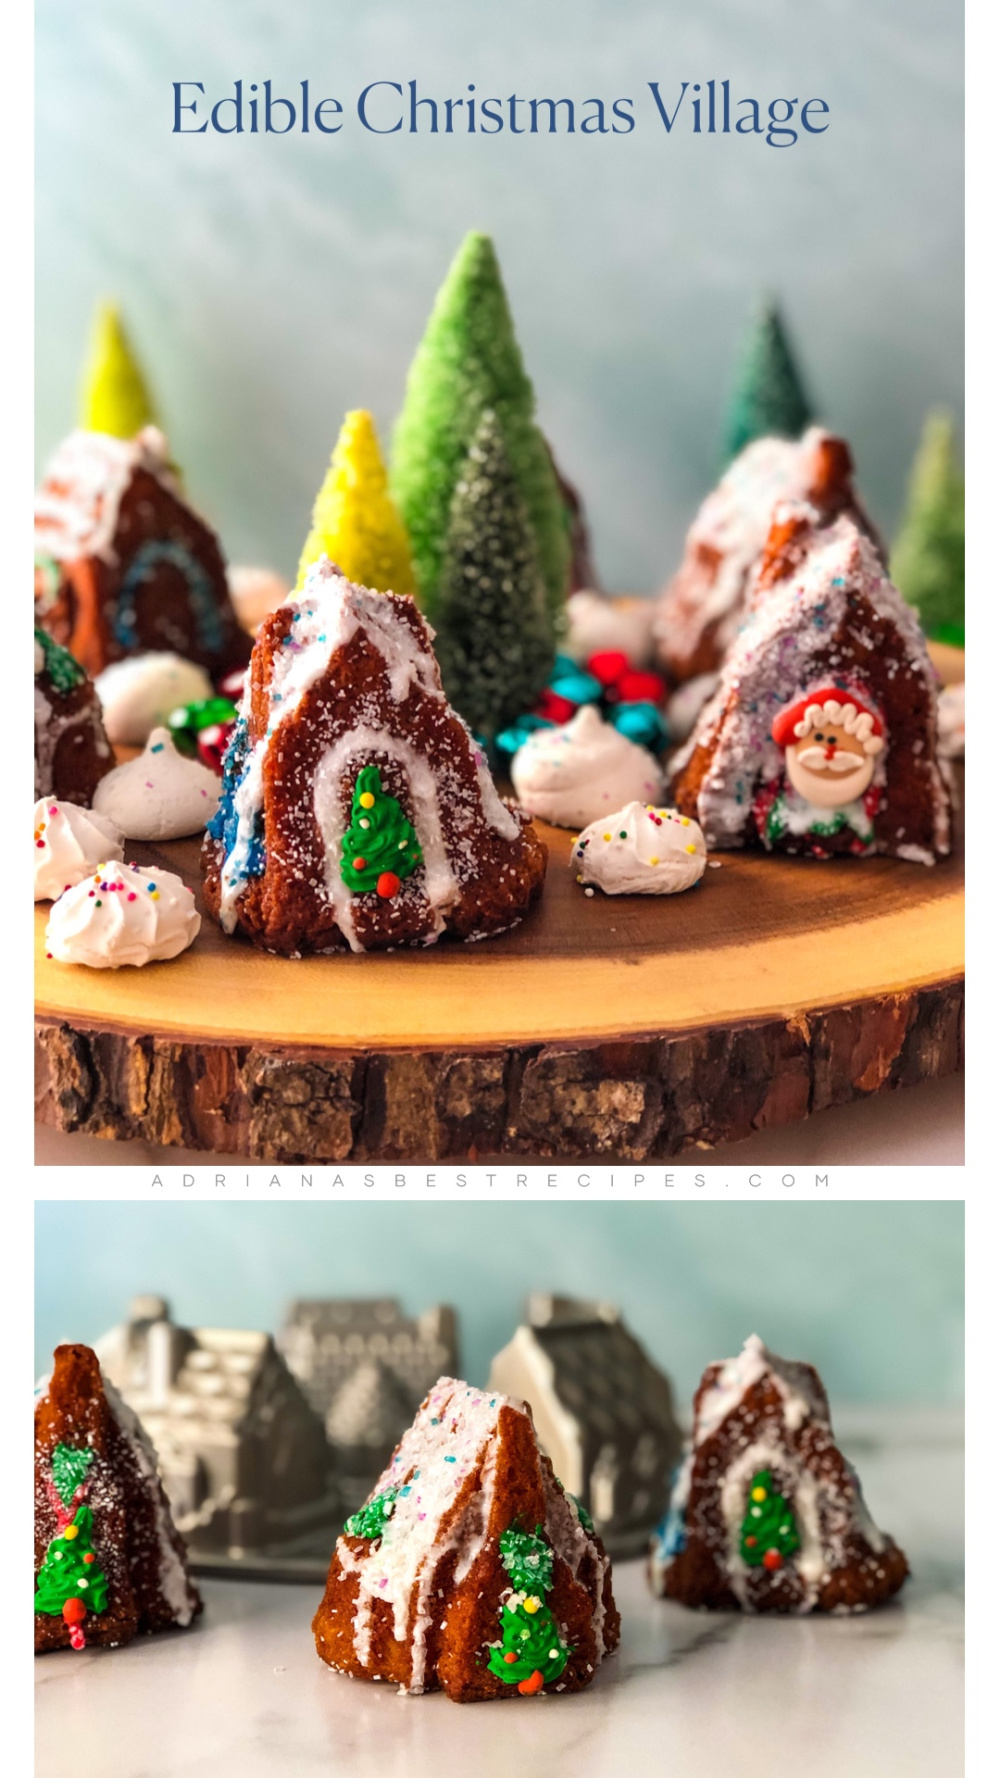 Edible Christmas Village with Apple Cupcakes - Adriana's Best Recipes